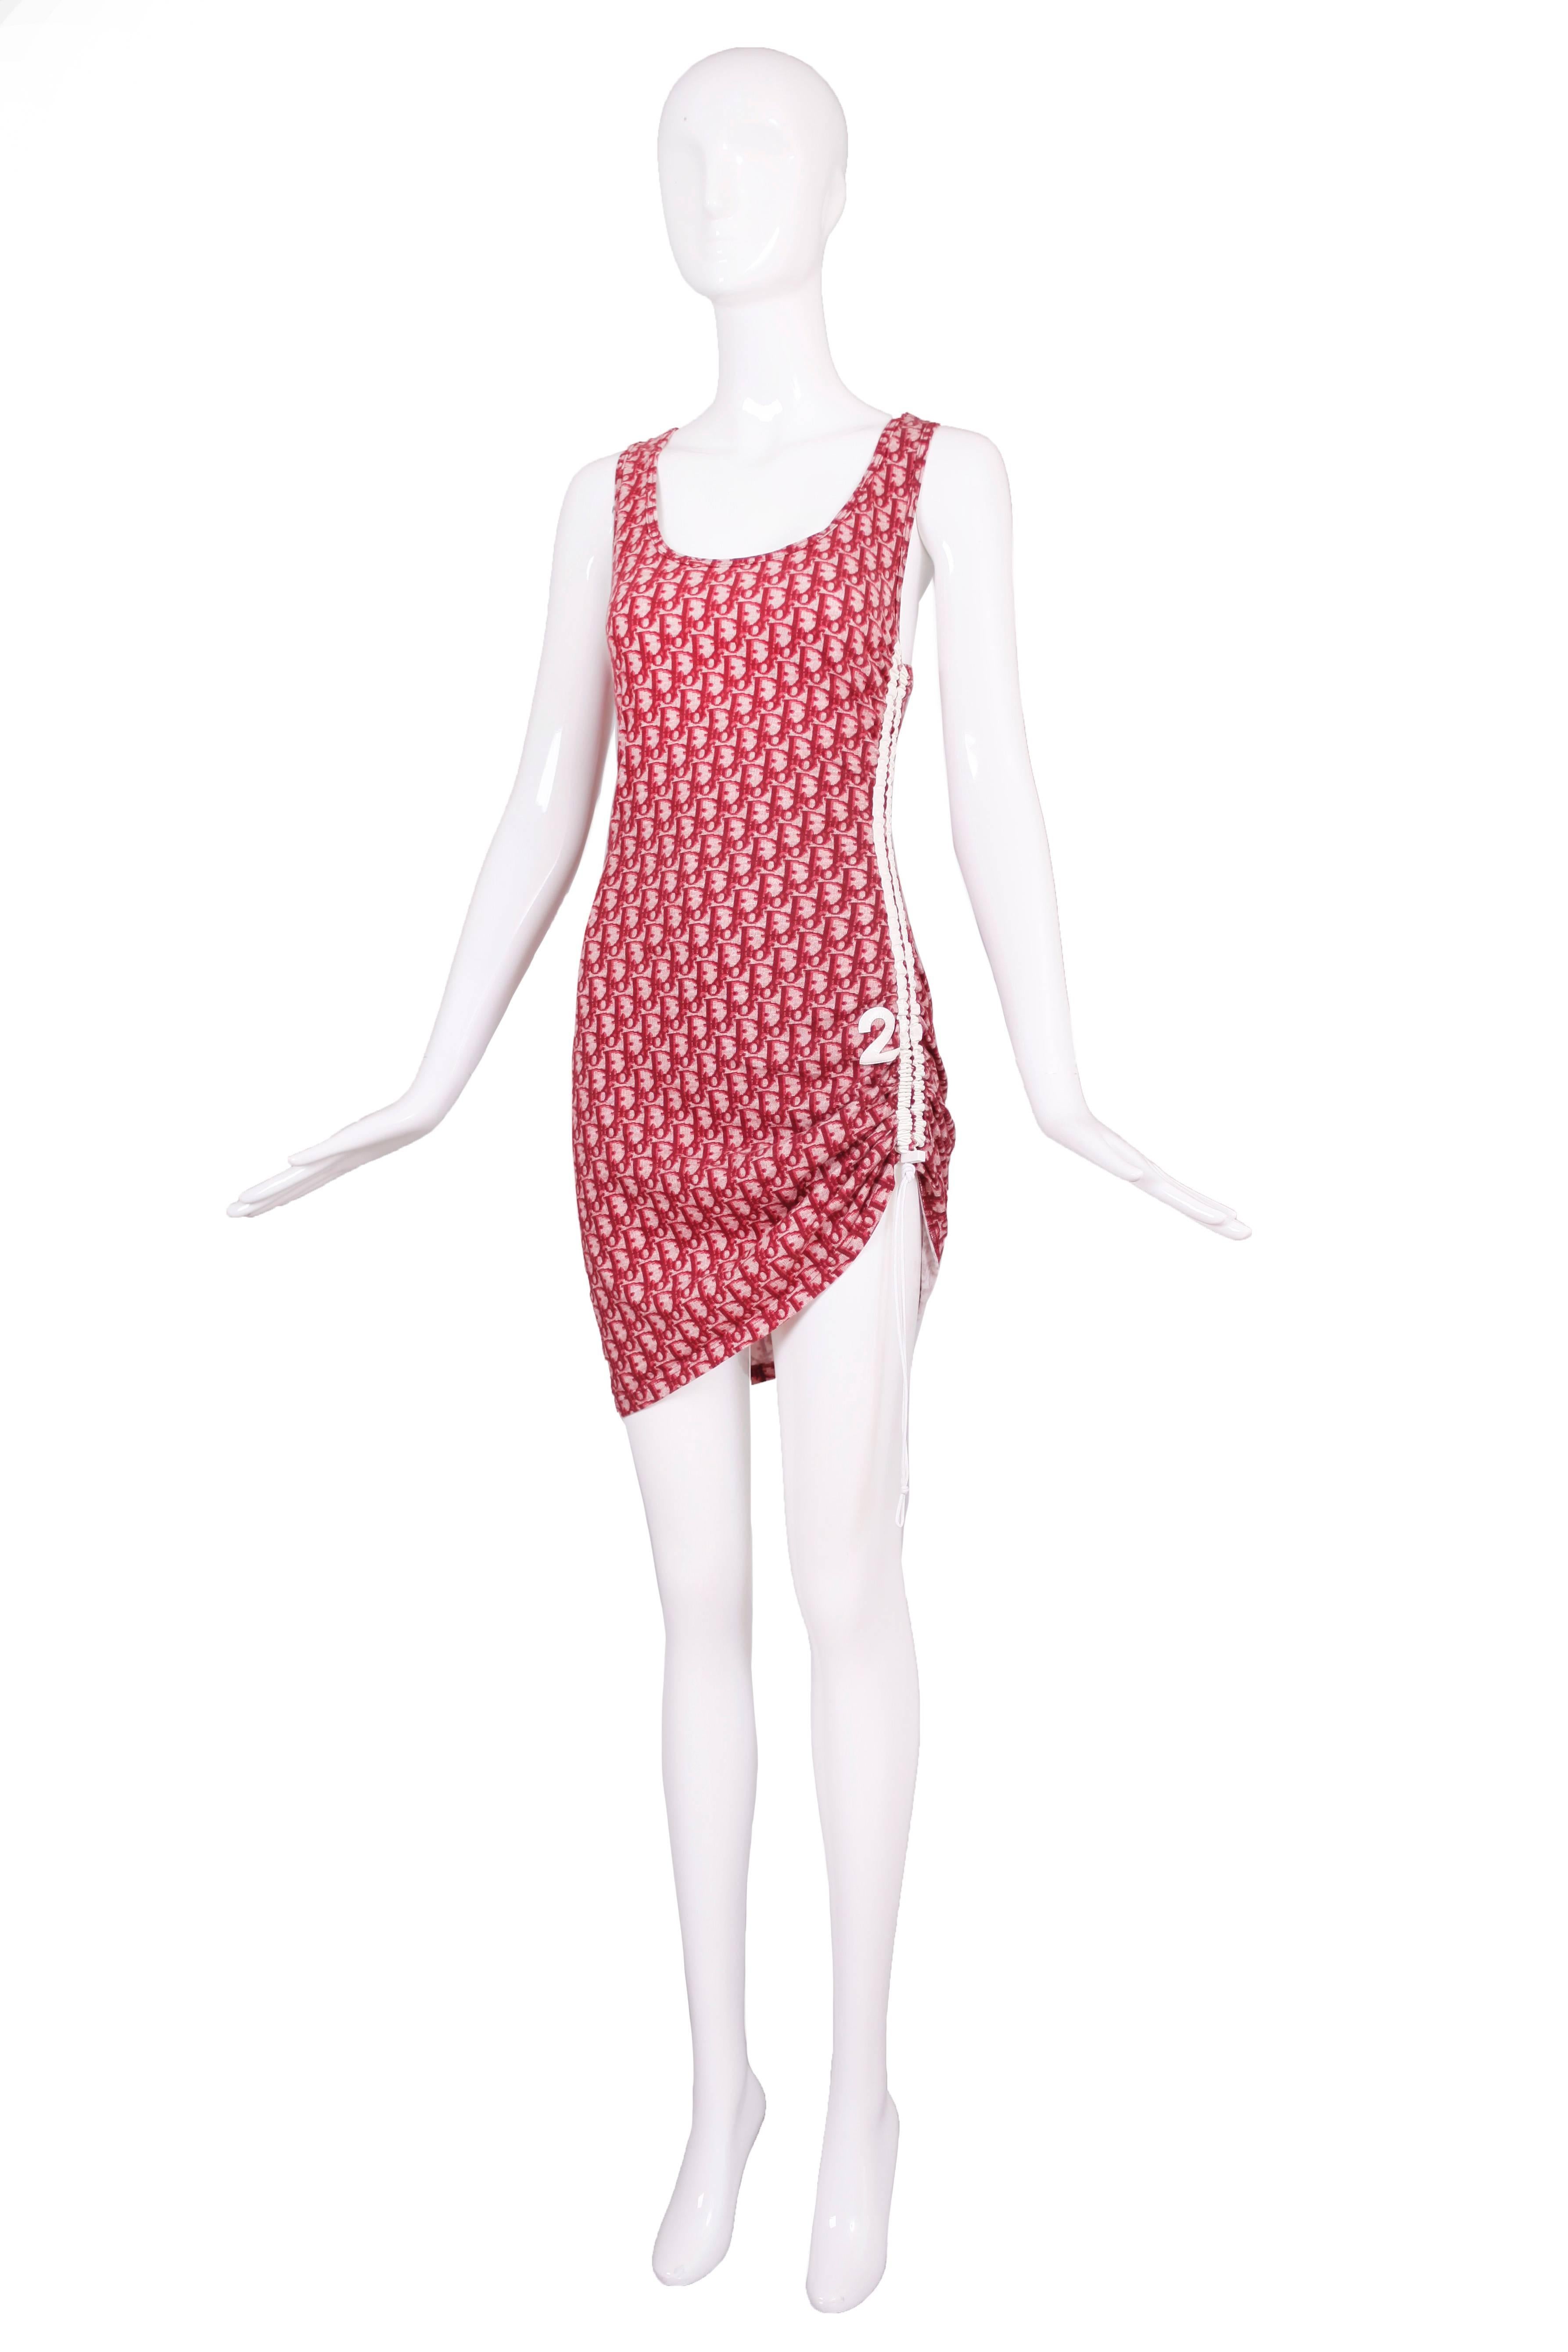 Christian Dior by John Galliano Dior logo print tank dress with white vinyl stripes and the number 2 at the side. In excellent condition. Size tag 8.